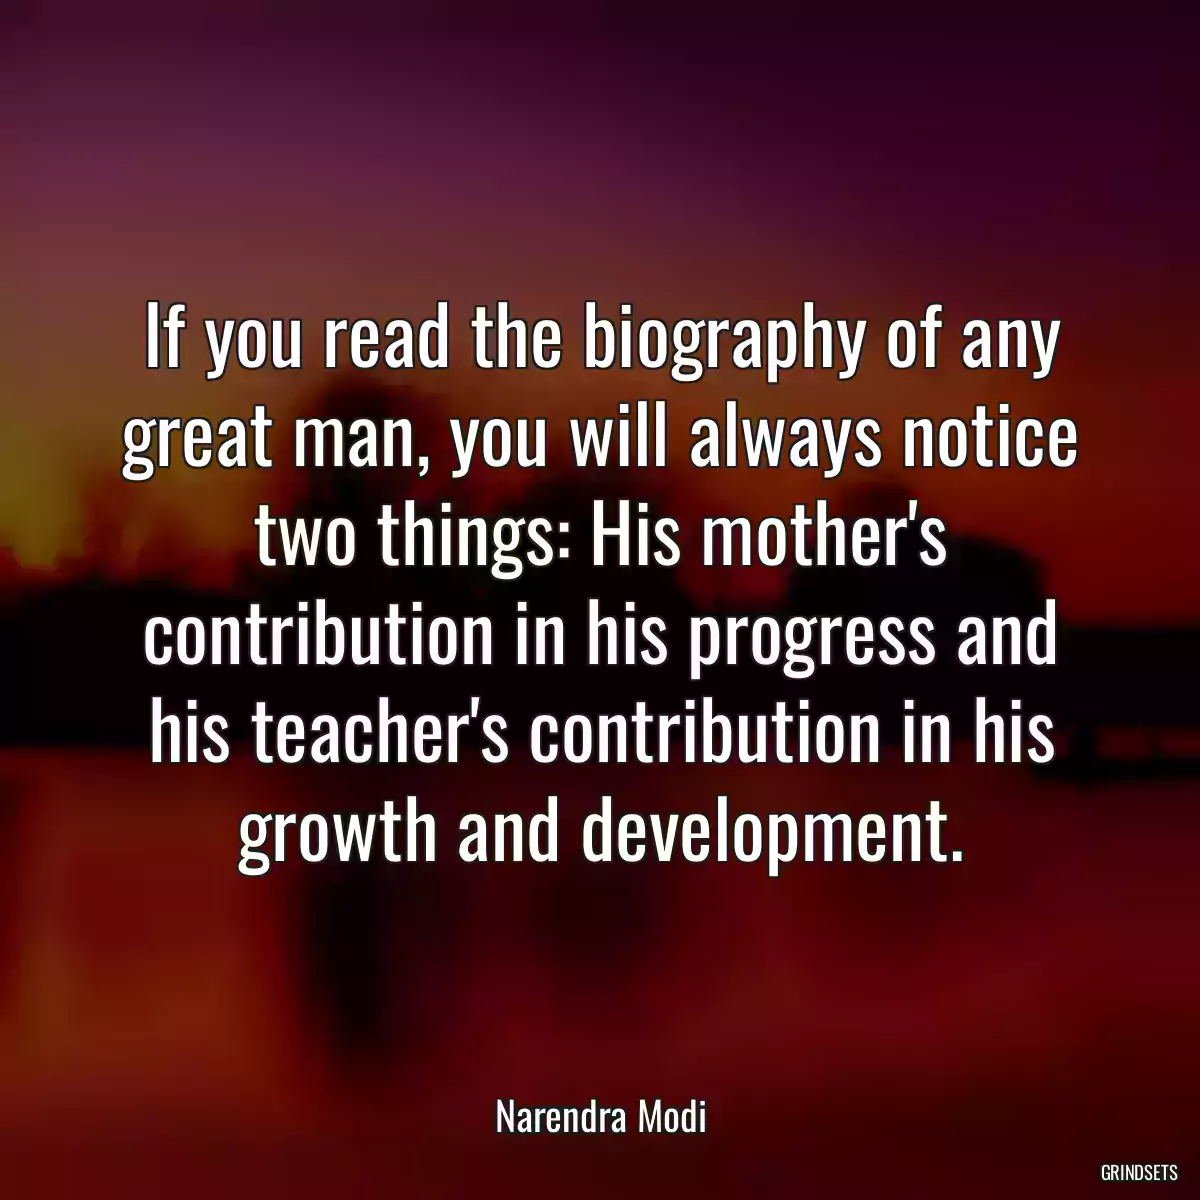 If you read the biography of any great man, you will always notice two things: His mother\'s contribution in his progress and his teacher\'s contribution in his growth and development.